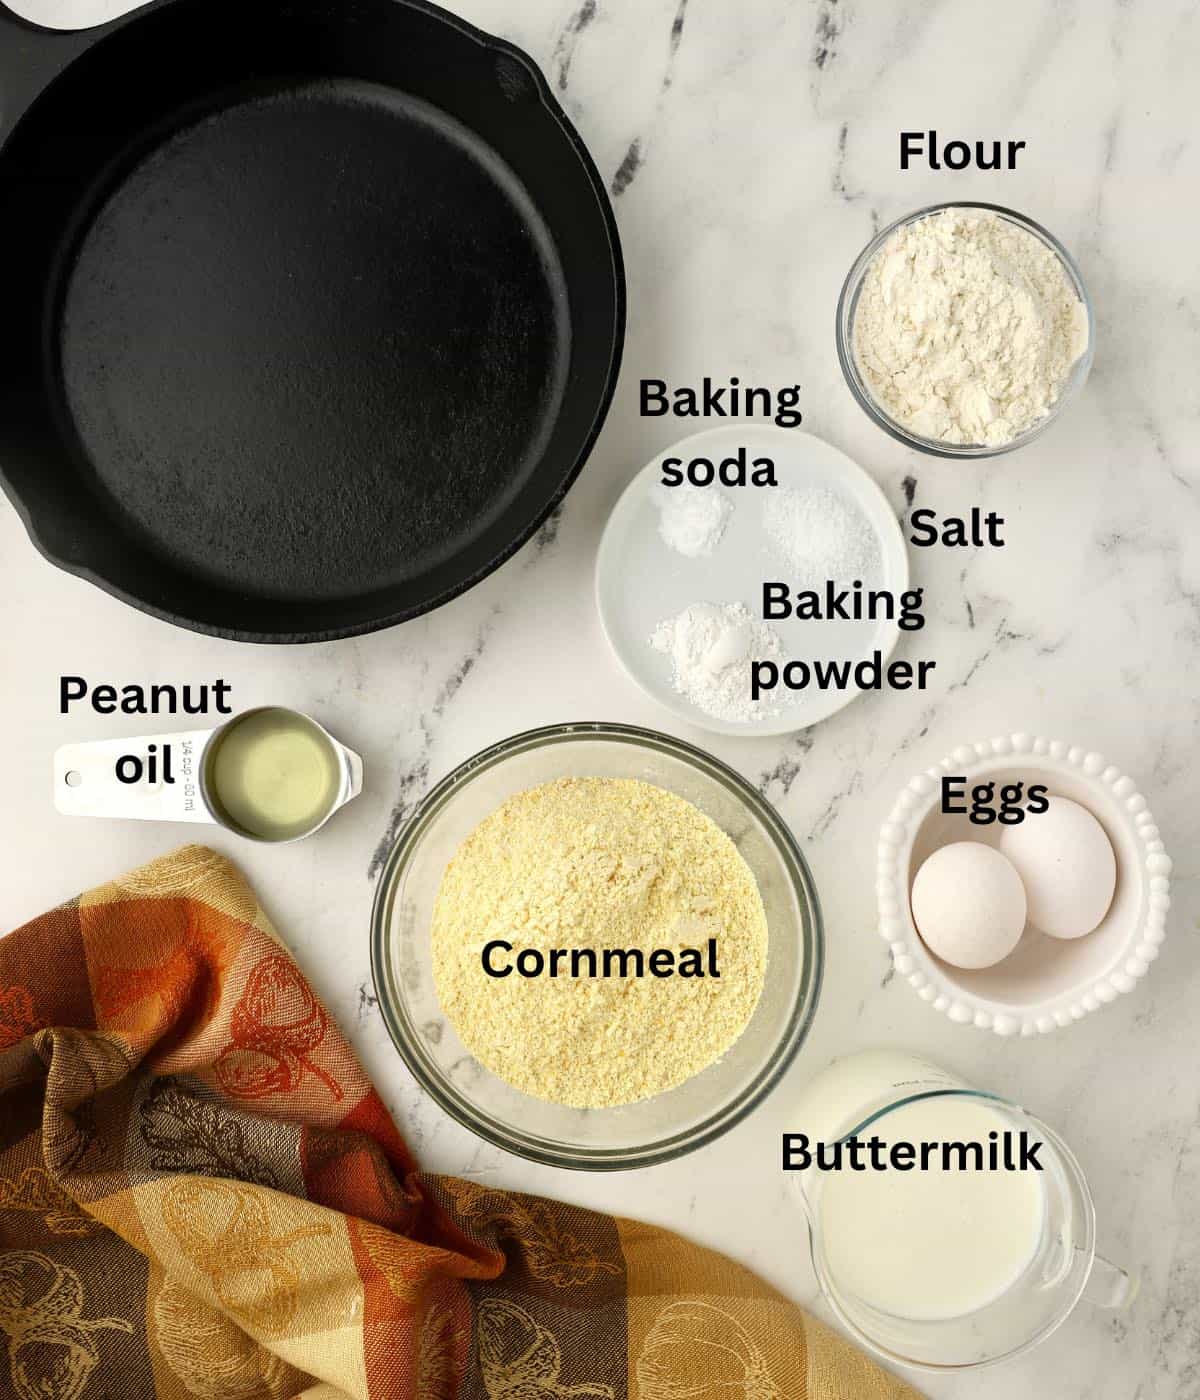 Ingredients for cornbread including cornmeal, flour and buttermilk.